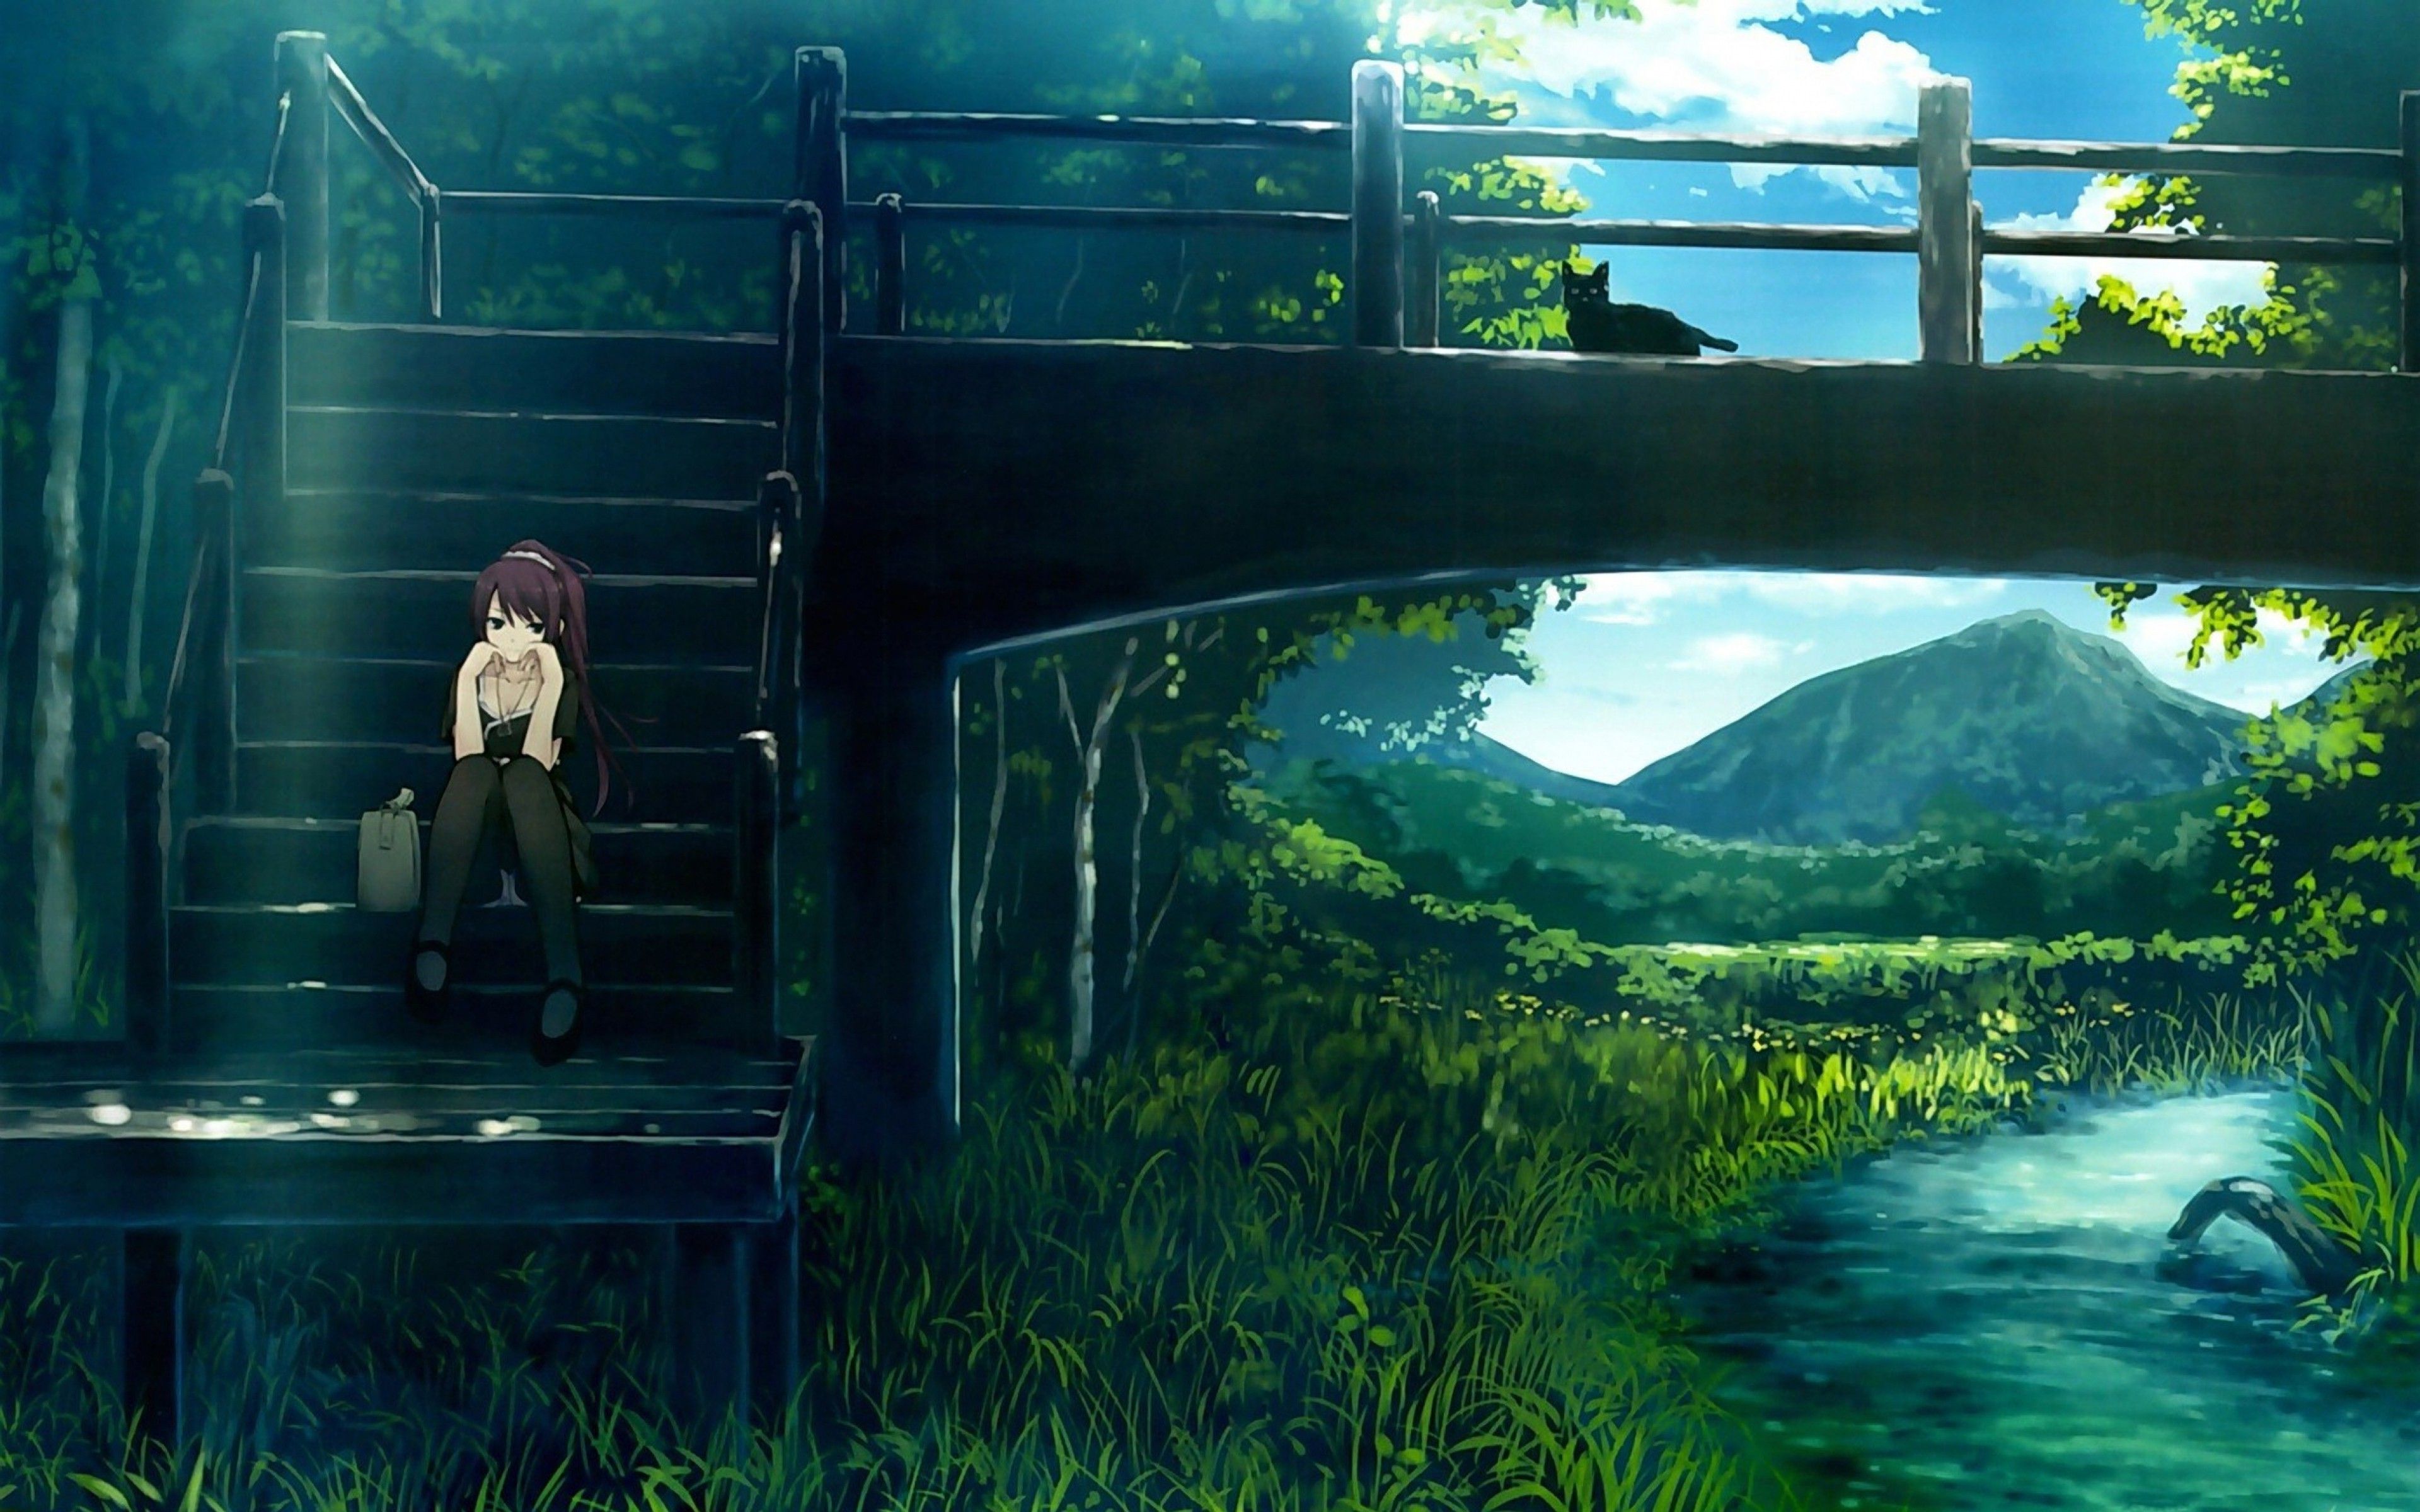 A person standing on the bridge overlooking water - Anime landscape